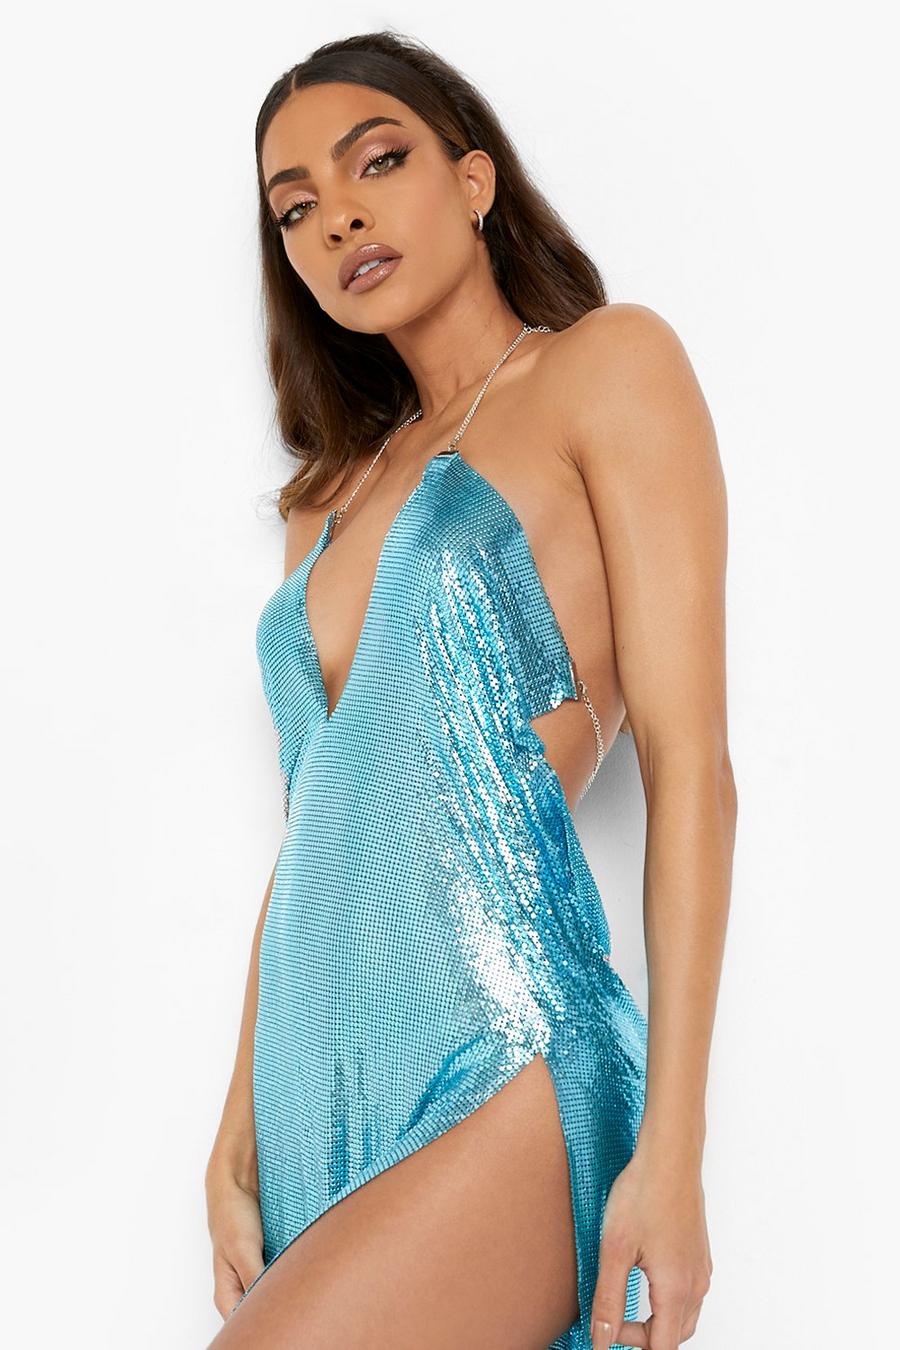 Baby blue Halter Plunge Front Chainmail Mini Dress